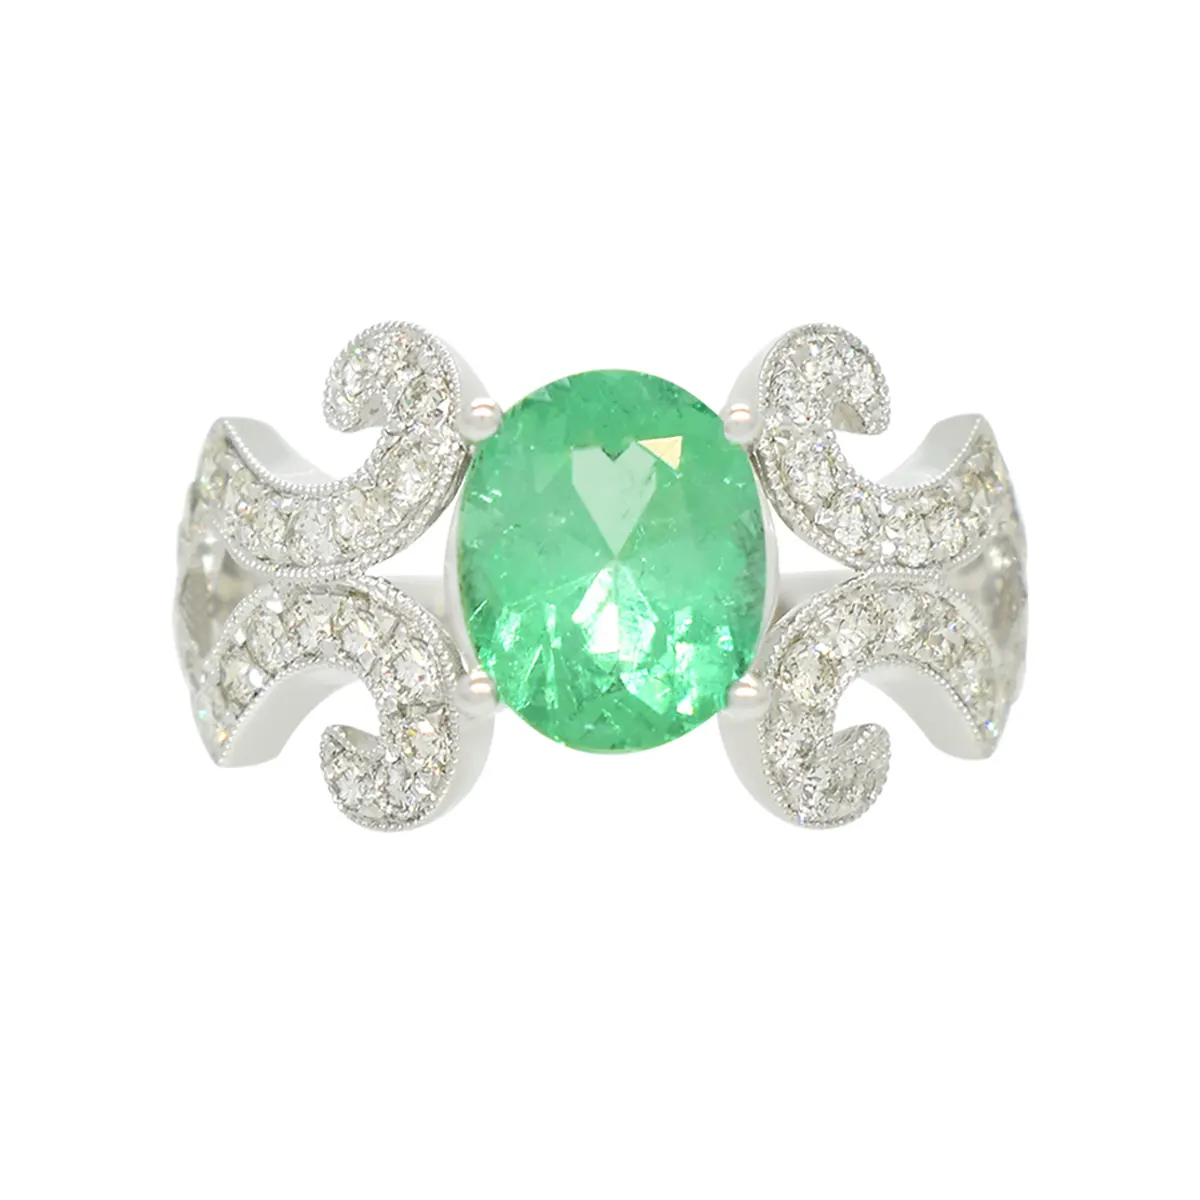 Stunning White Gold Emerald Ring with Oval Shape Genuine Emerald and 44 Round Diamonds